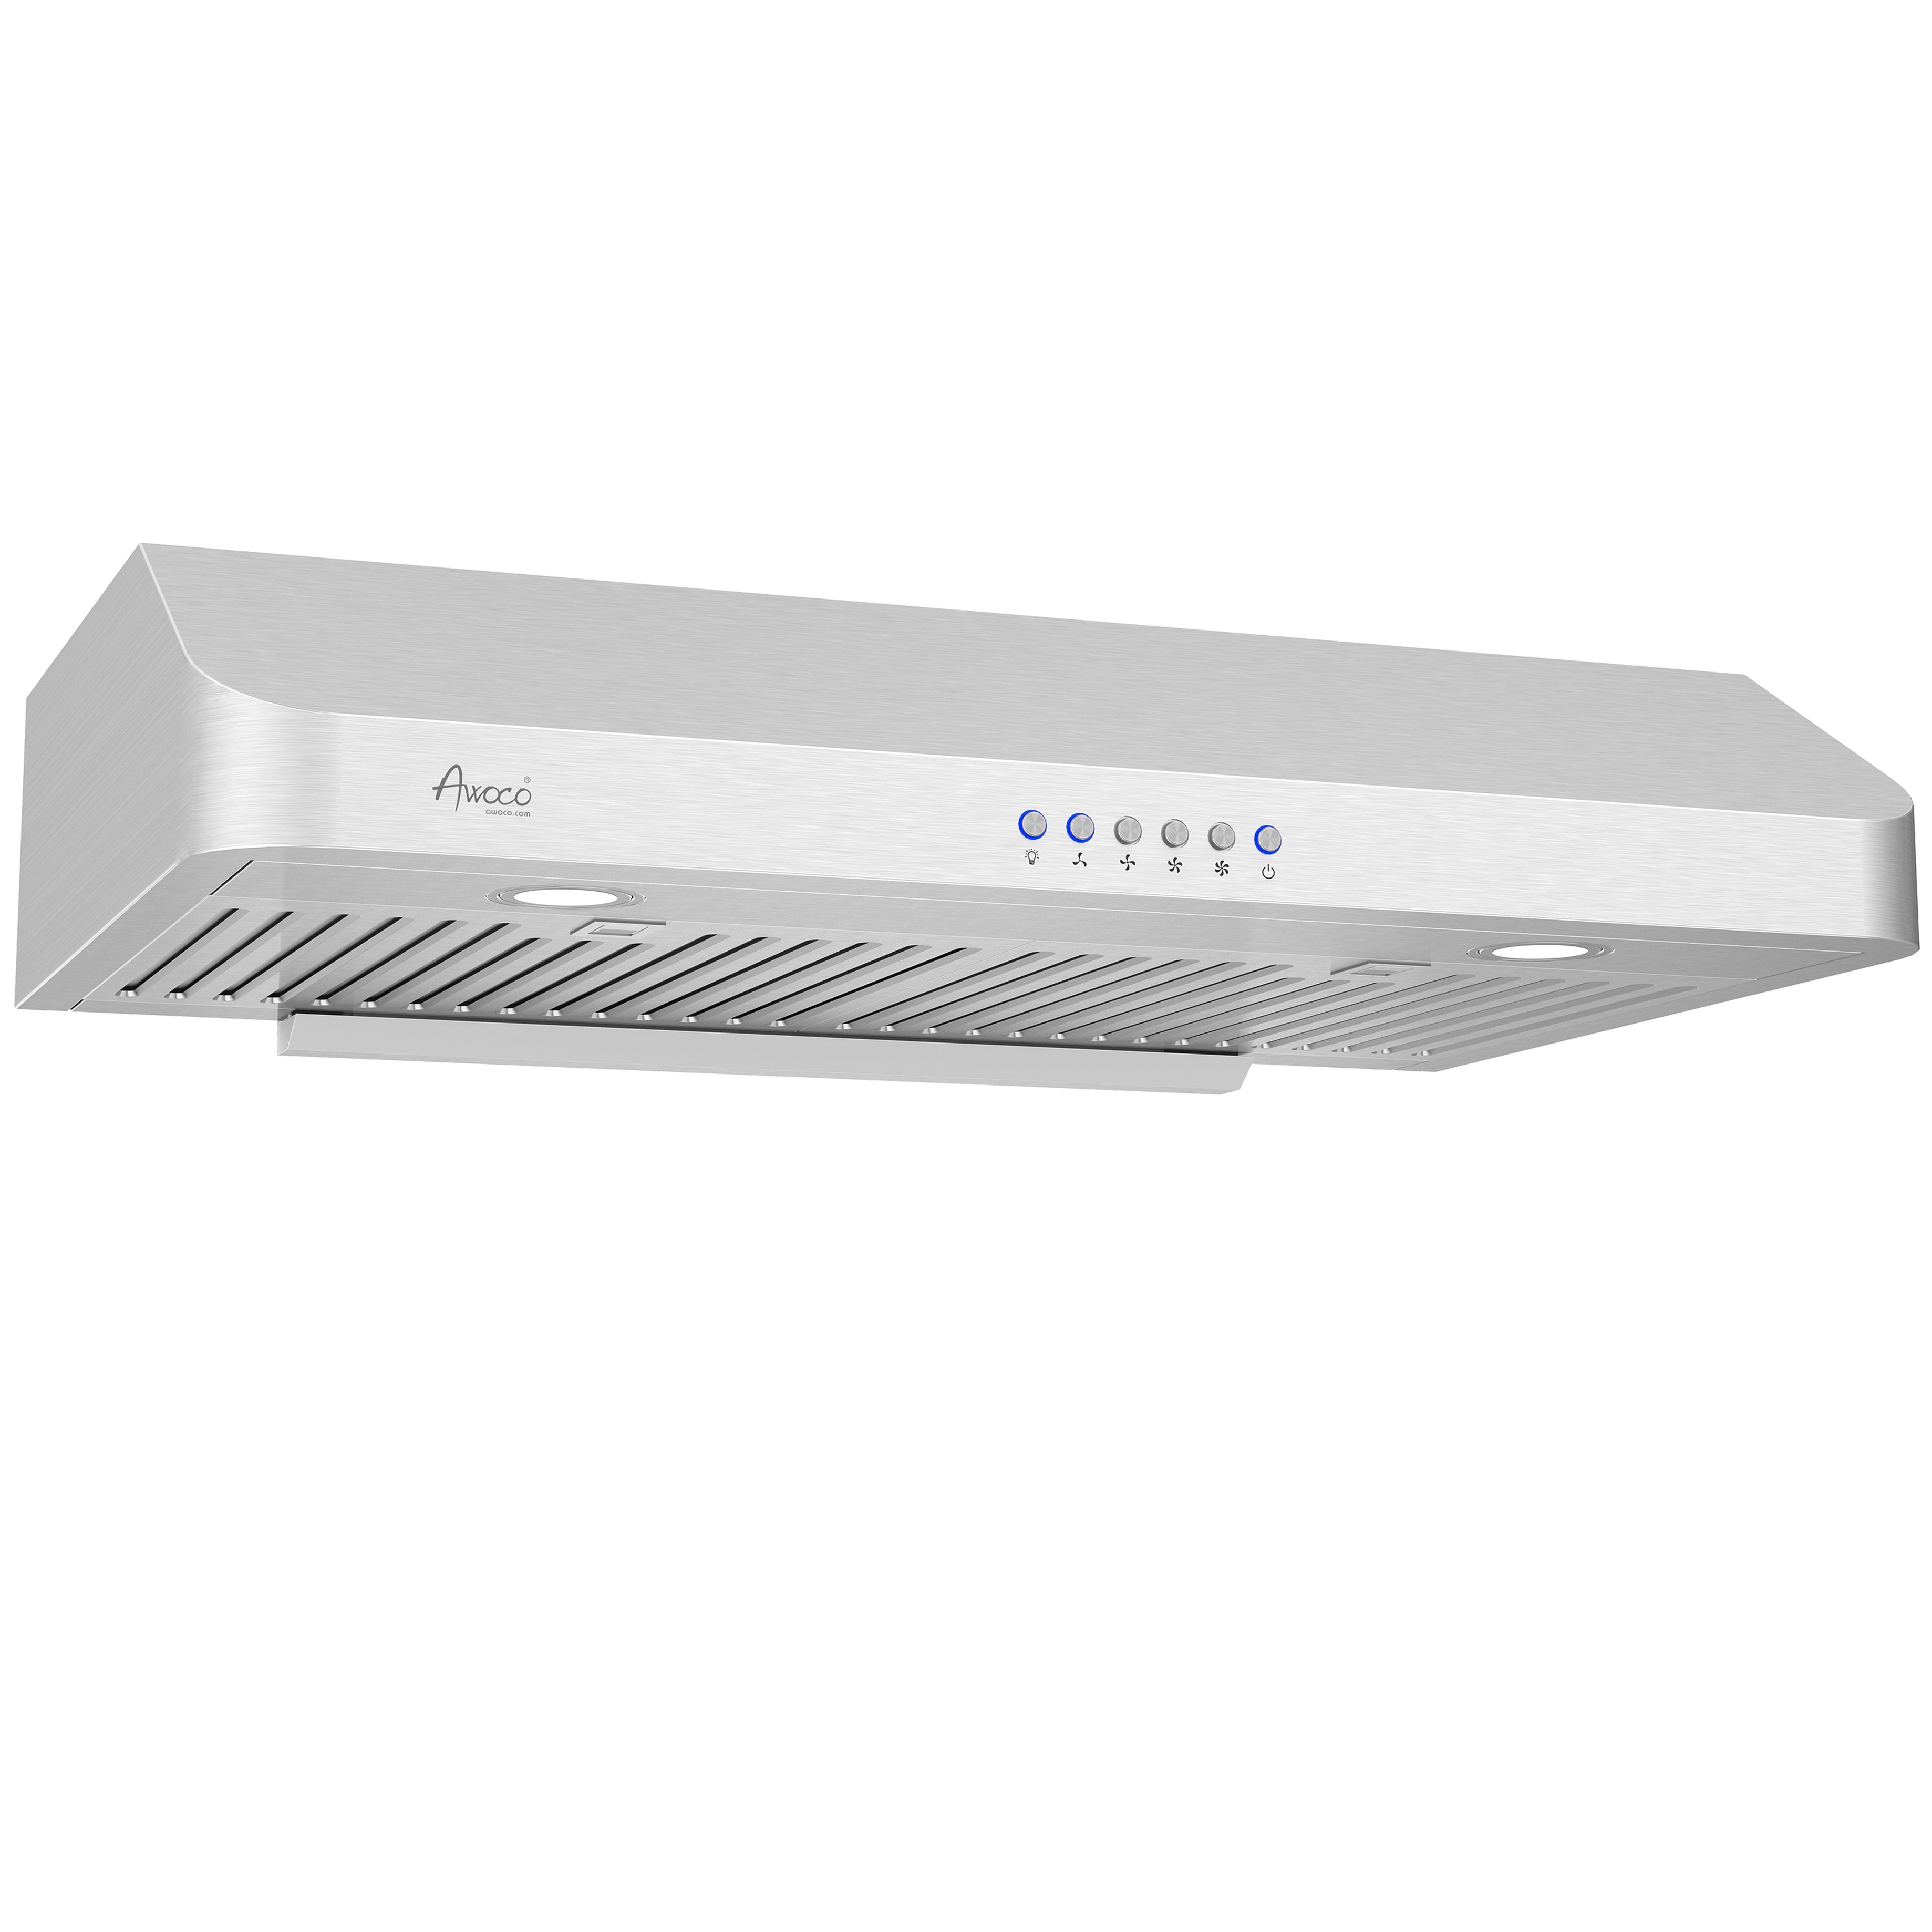 Awoco RH-C06-30 Classic 6" High Stainless Steel Under Cabinet 4 Speeds 900CFM Range Hood with 2 LED Lights (30"W Top Vent)